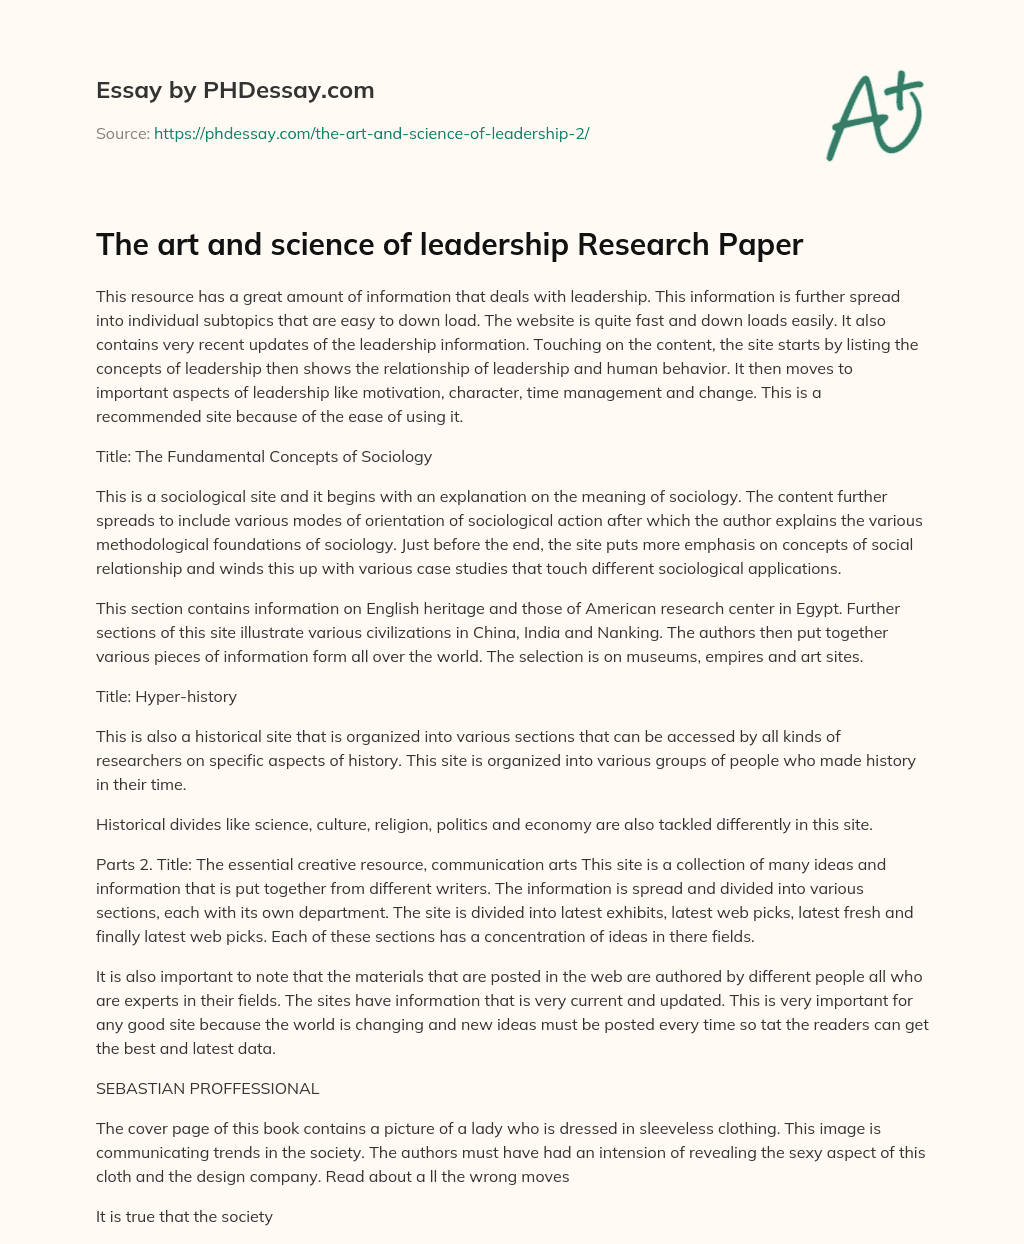 The art and science of leadership Research Paper essay